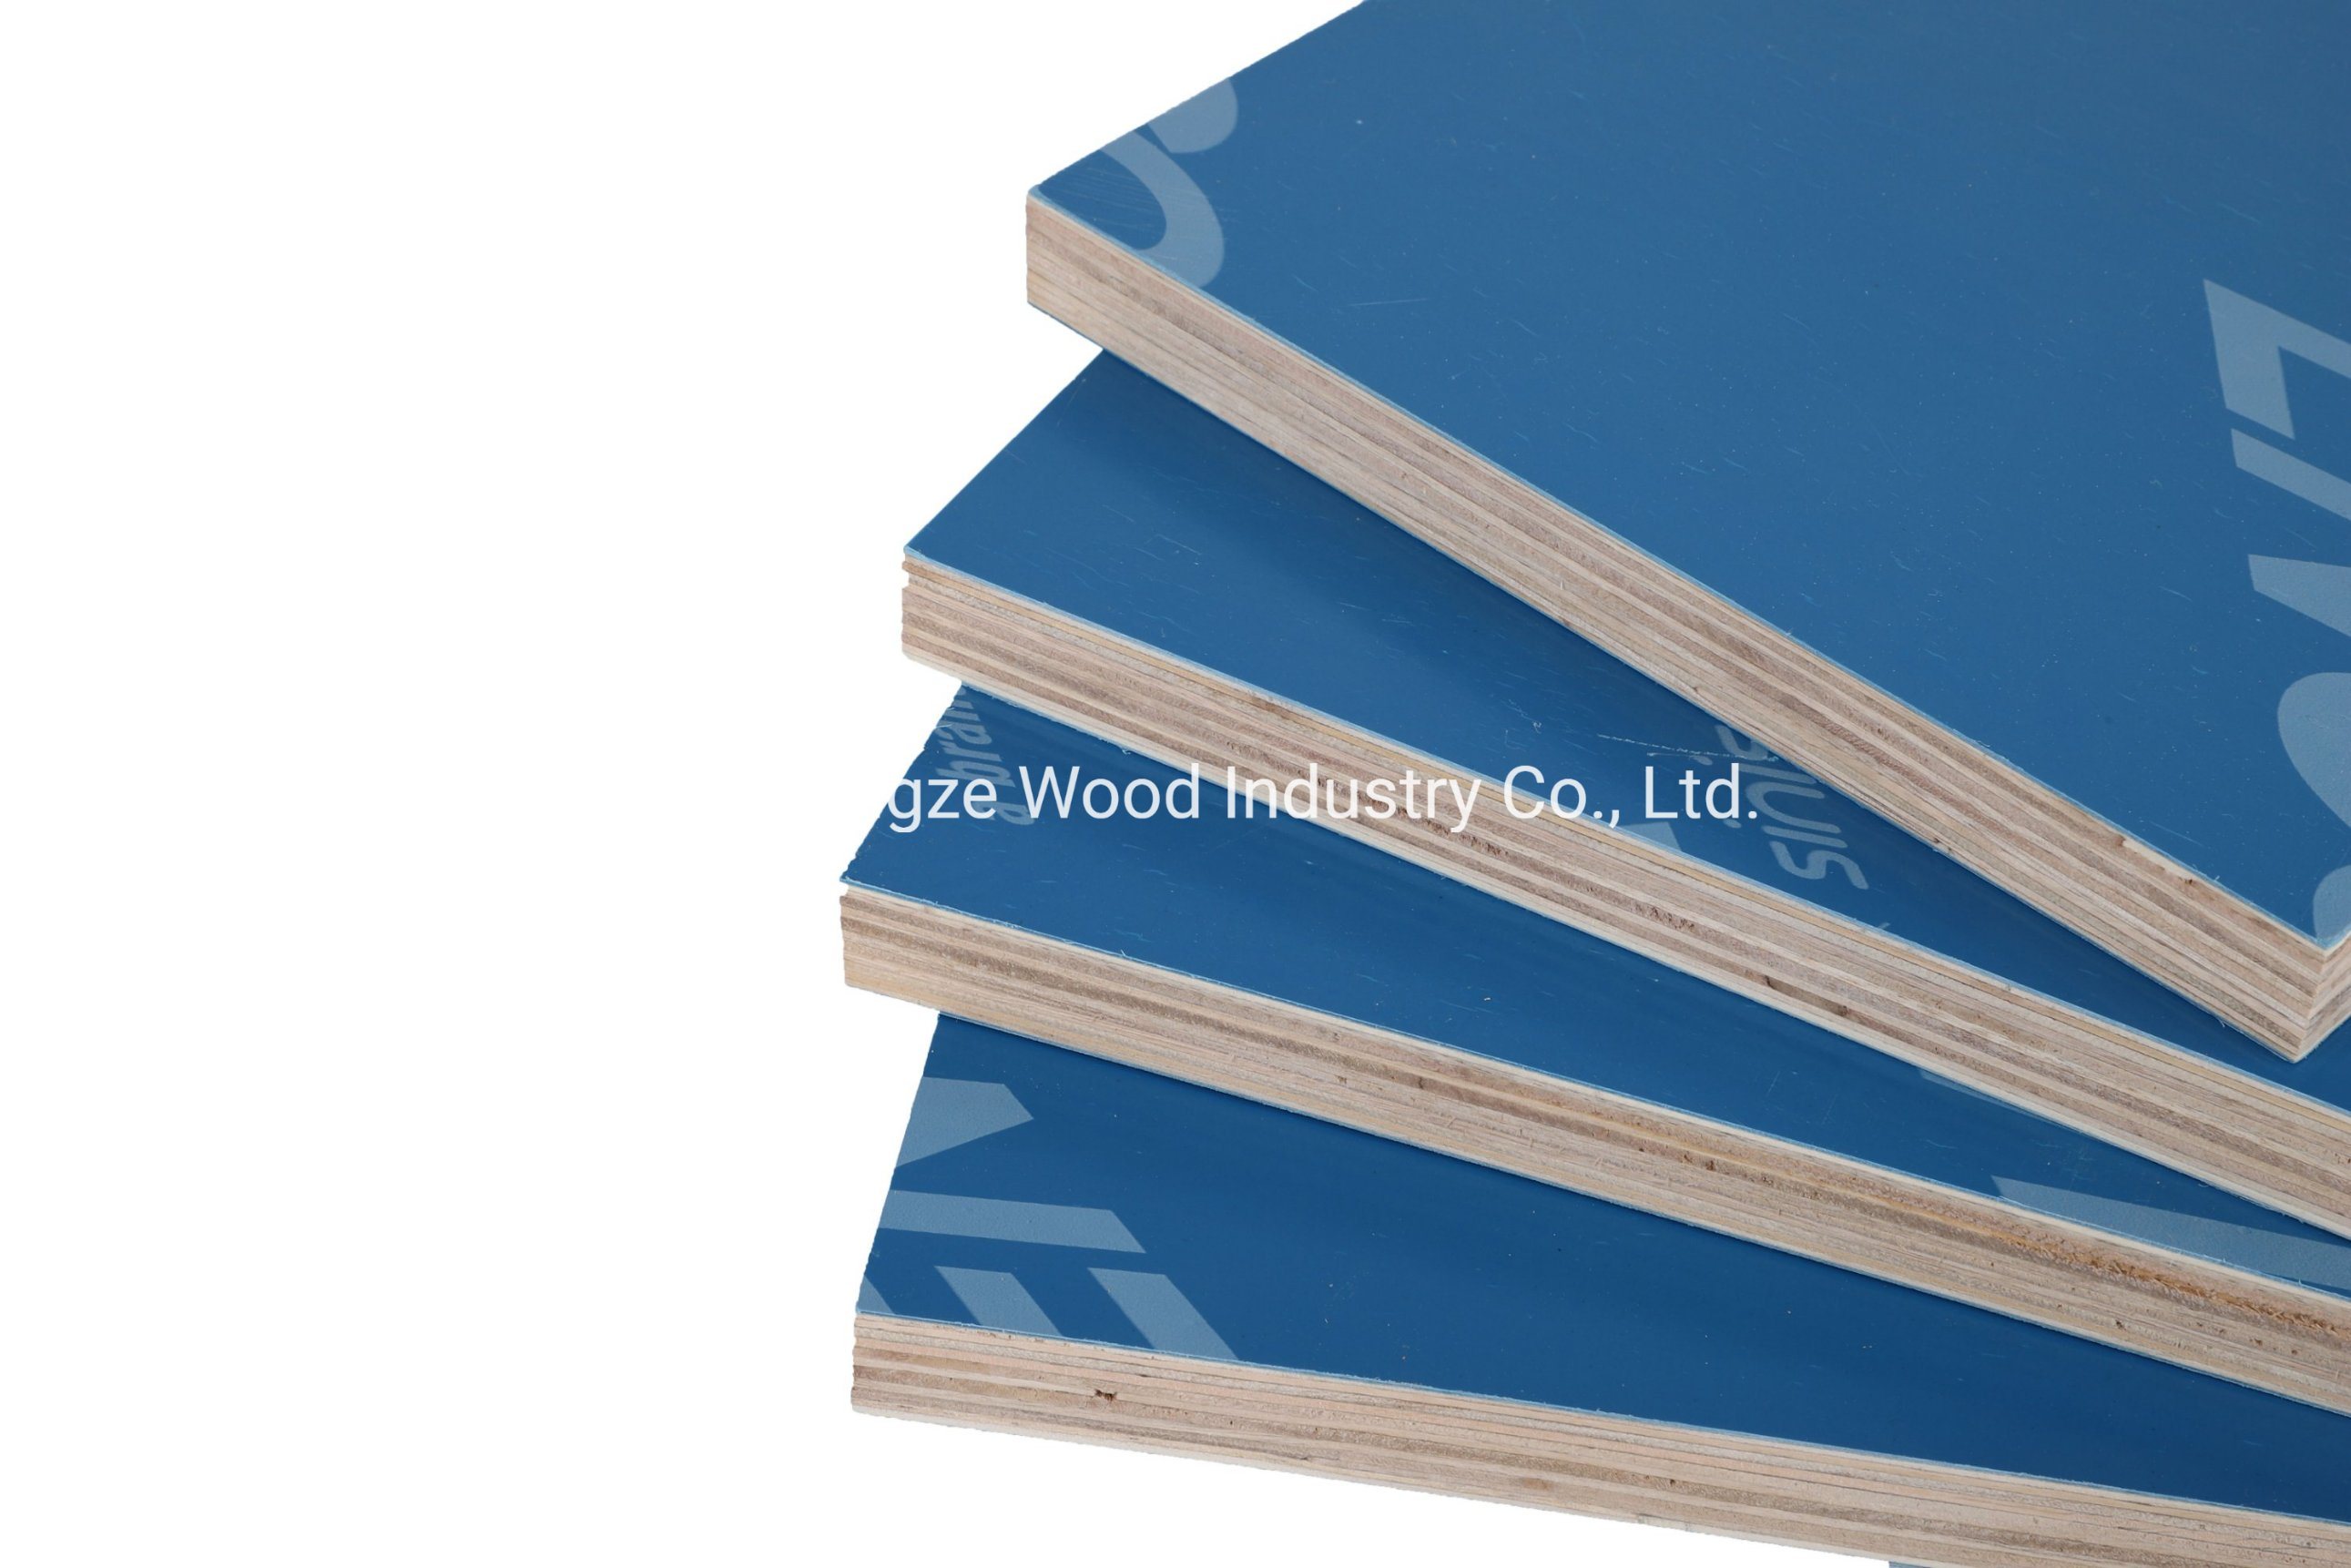 Competitive Price 12mm/18mm Black or Blue Film Faced Plywood